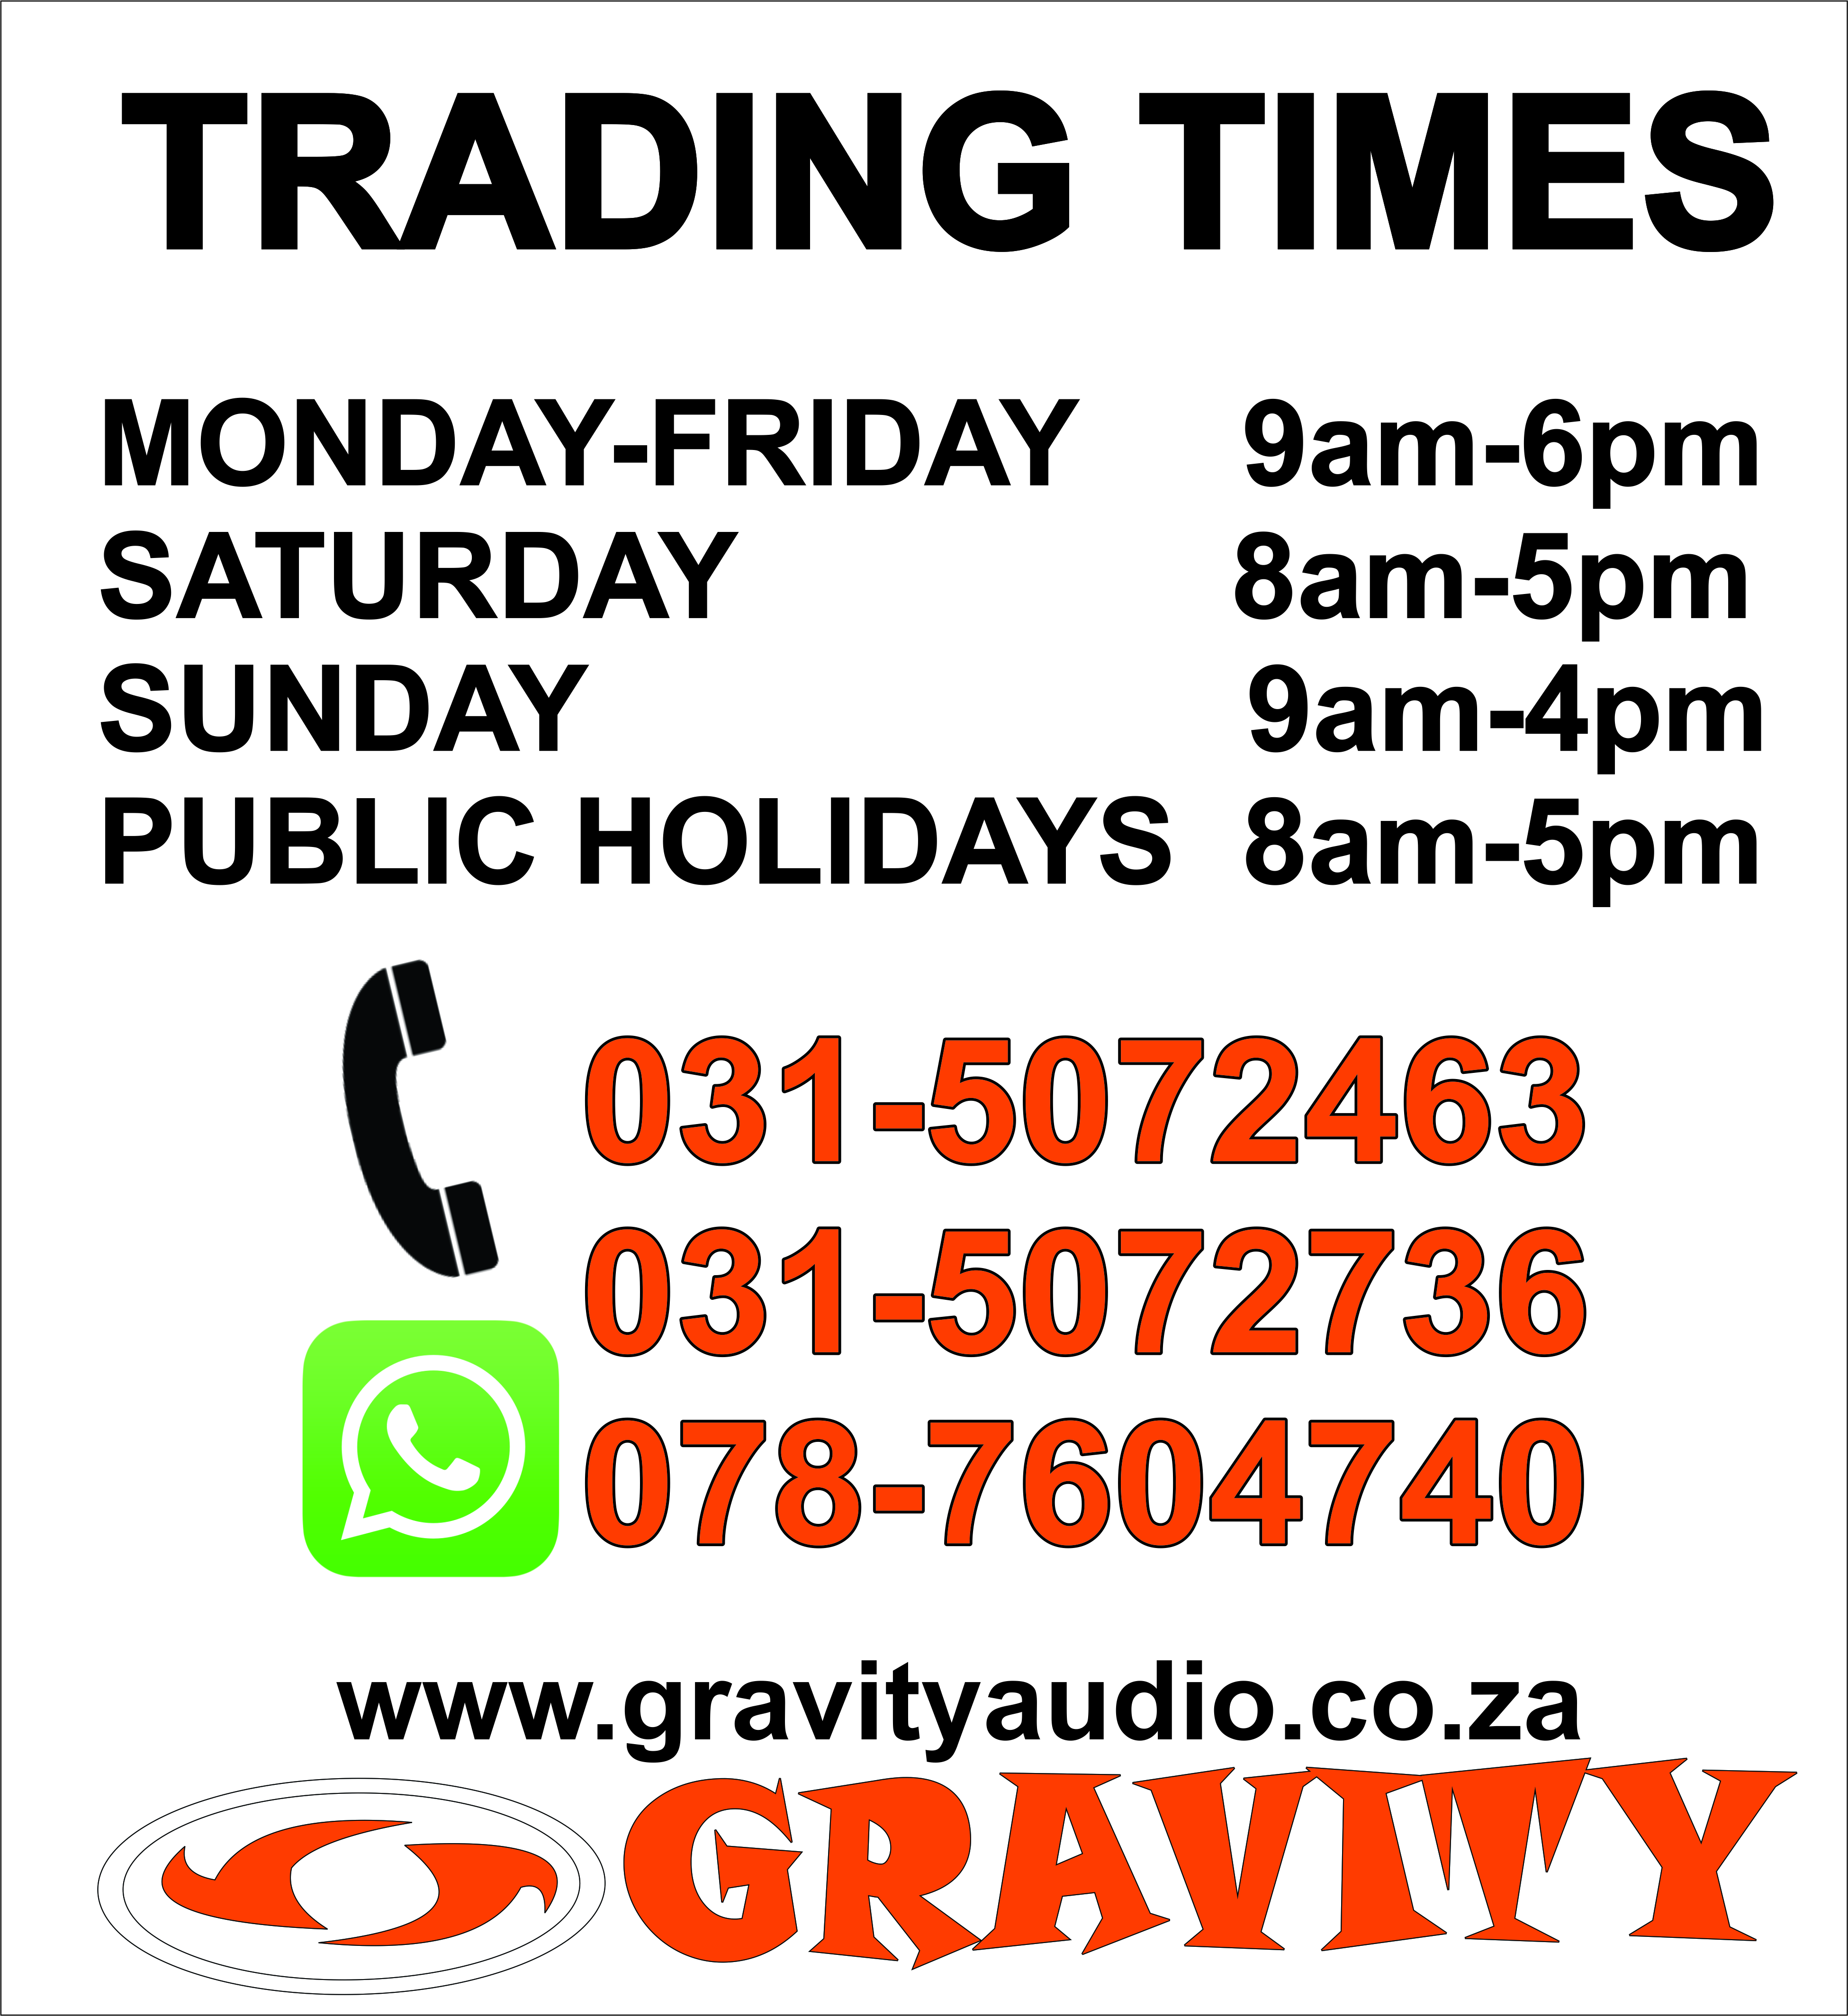 TRADING TIMES AT GRAVITY REPAIR CENTRE GRAVITY DJ STORE 0787604740